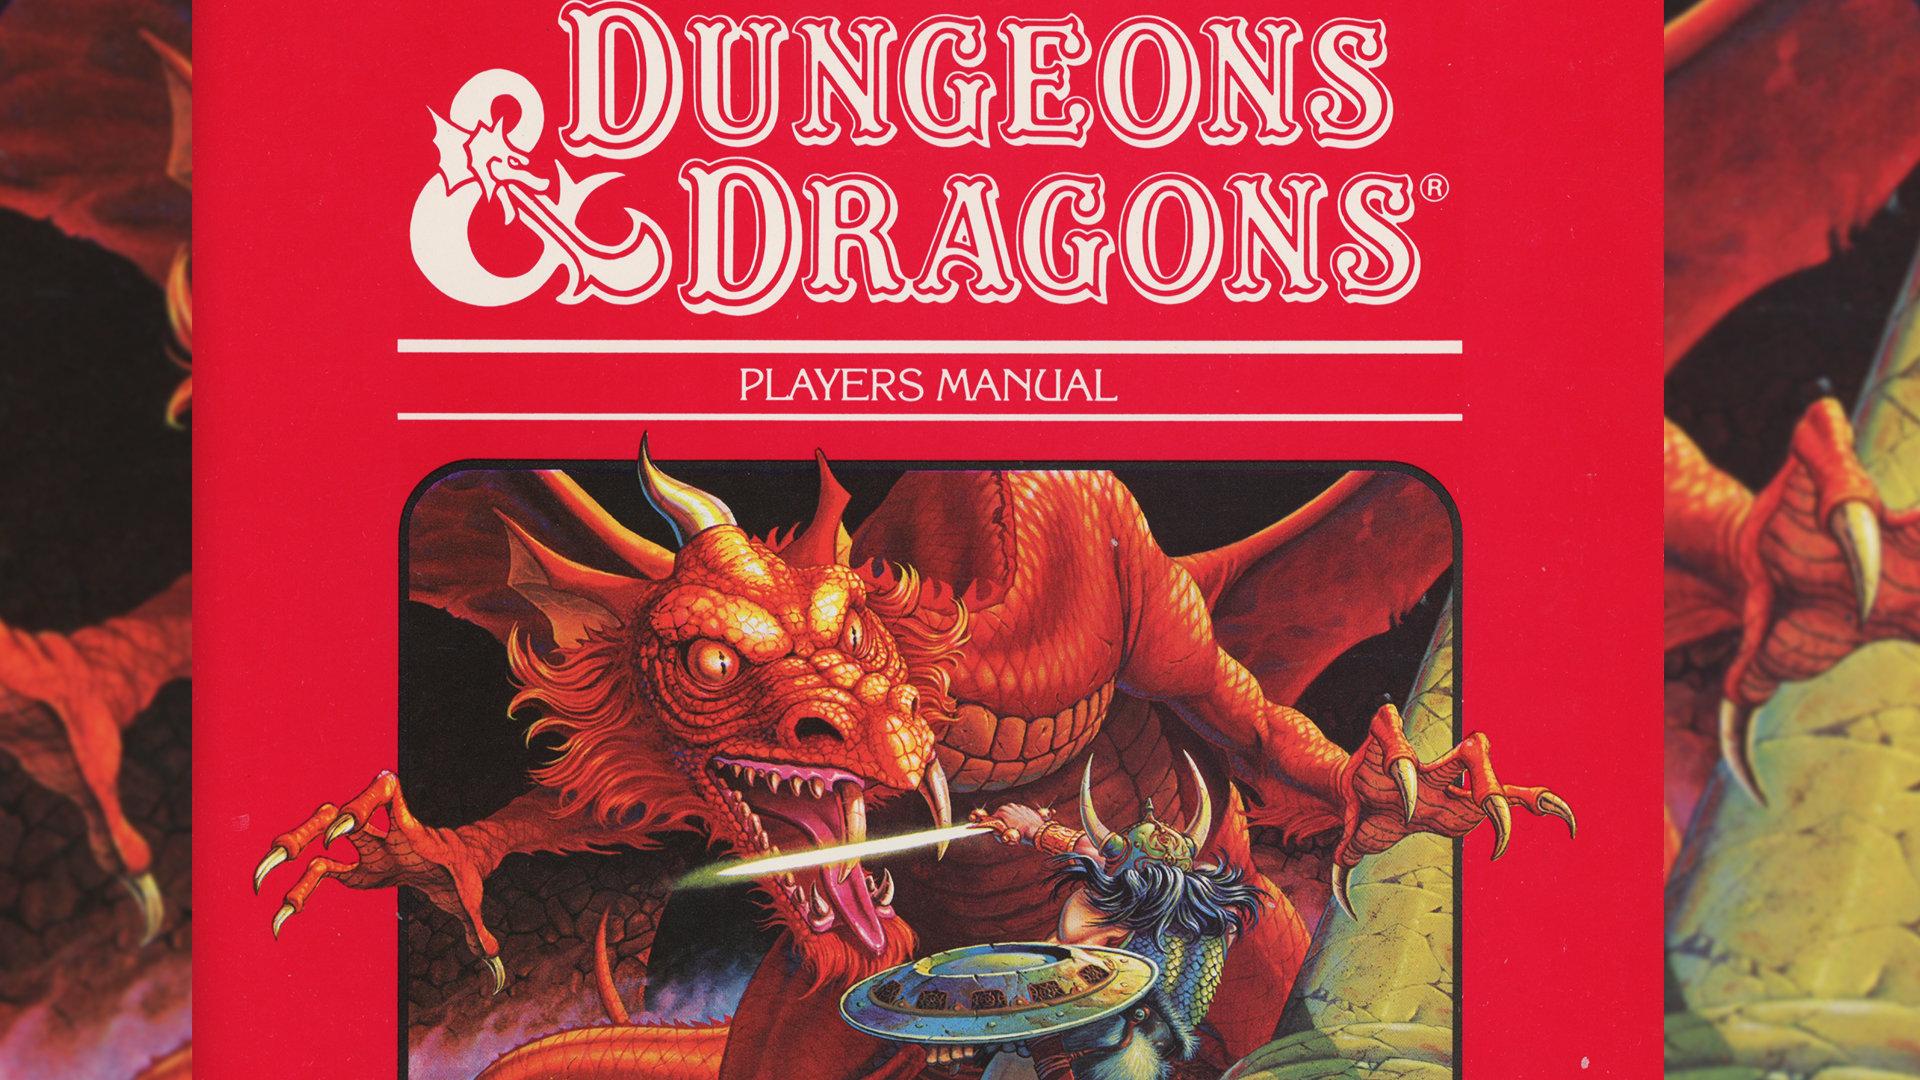 Dungeons & Dragons, introduced in attracted millions of players, along with accusations by some religious figures that the game fostered demon worship and a belief in witchcraft and magic